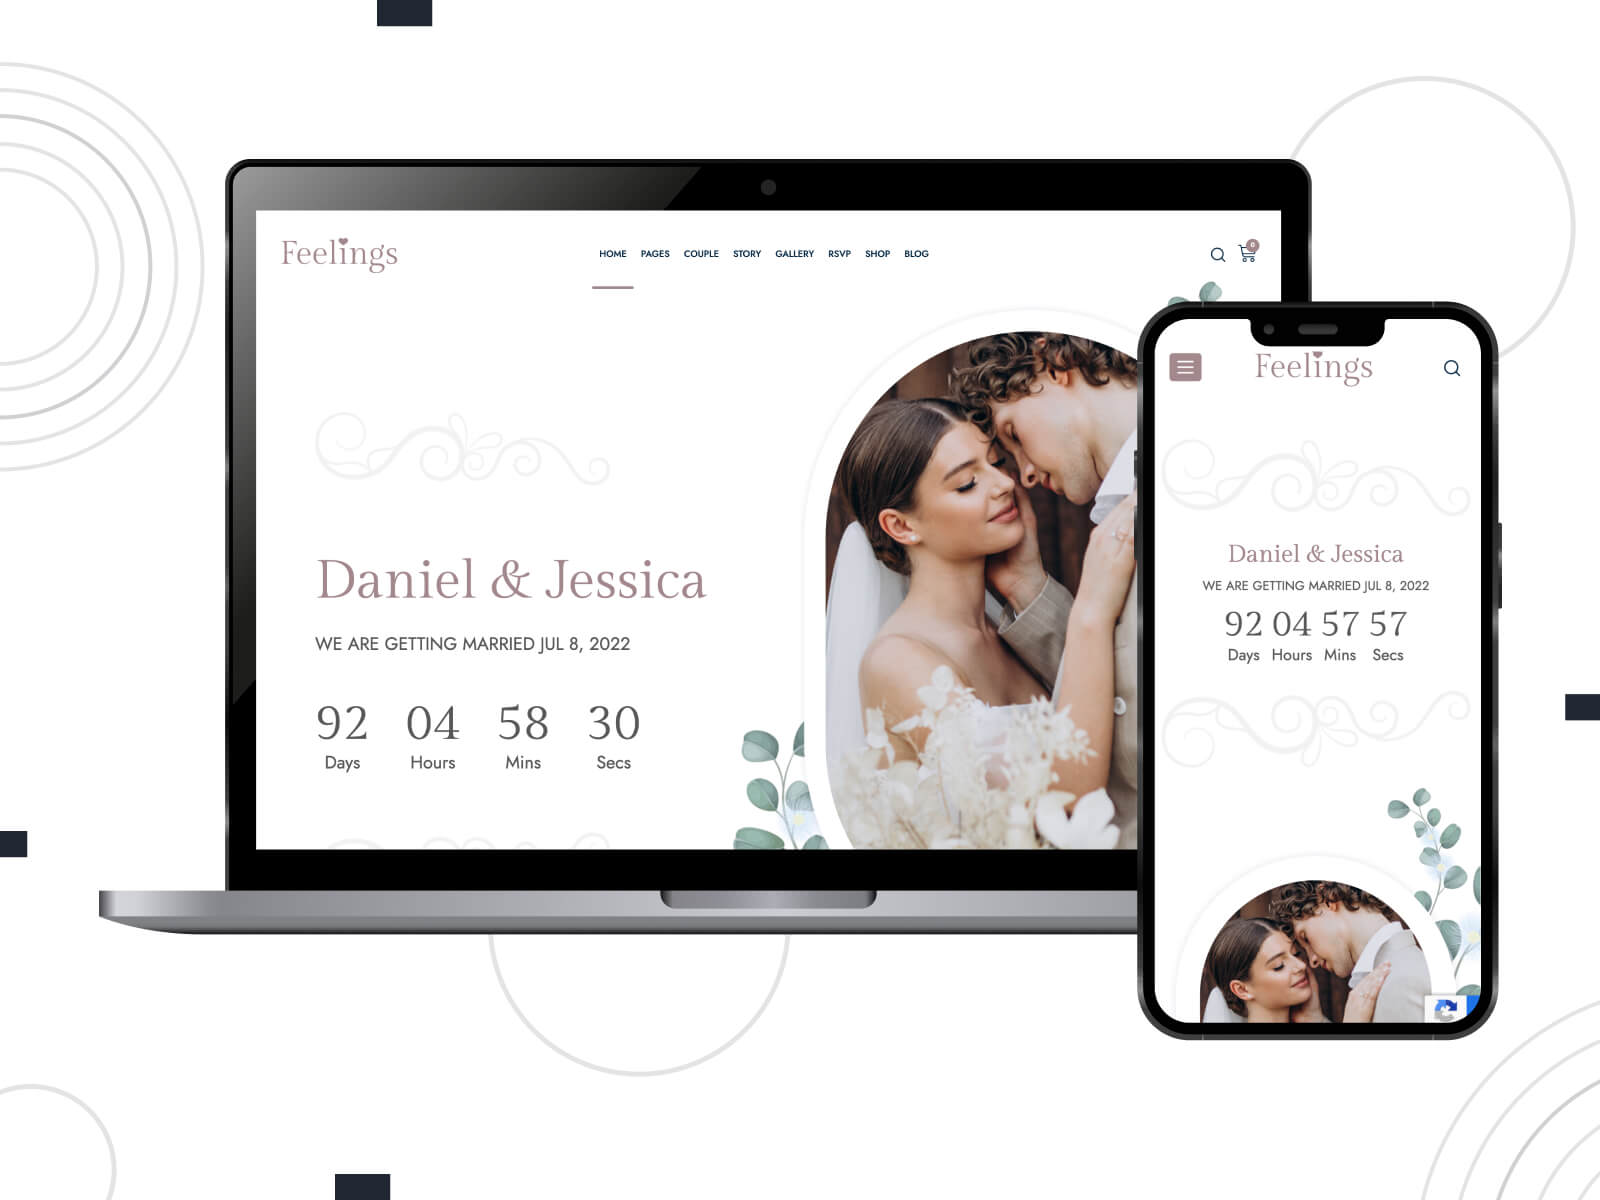 Picture of Feelings - bright, rich, WordPress themes for weddings supporting multiple languages, ideal for international ceremonies in dim gray, rosy brown, and dark olive green hues.